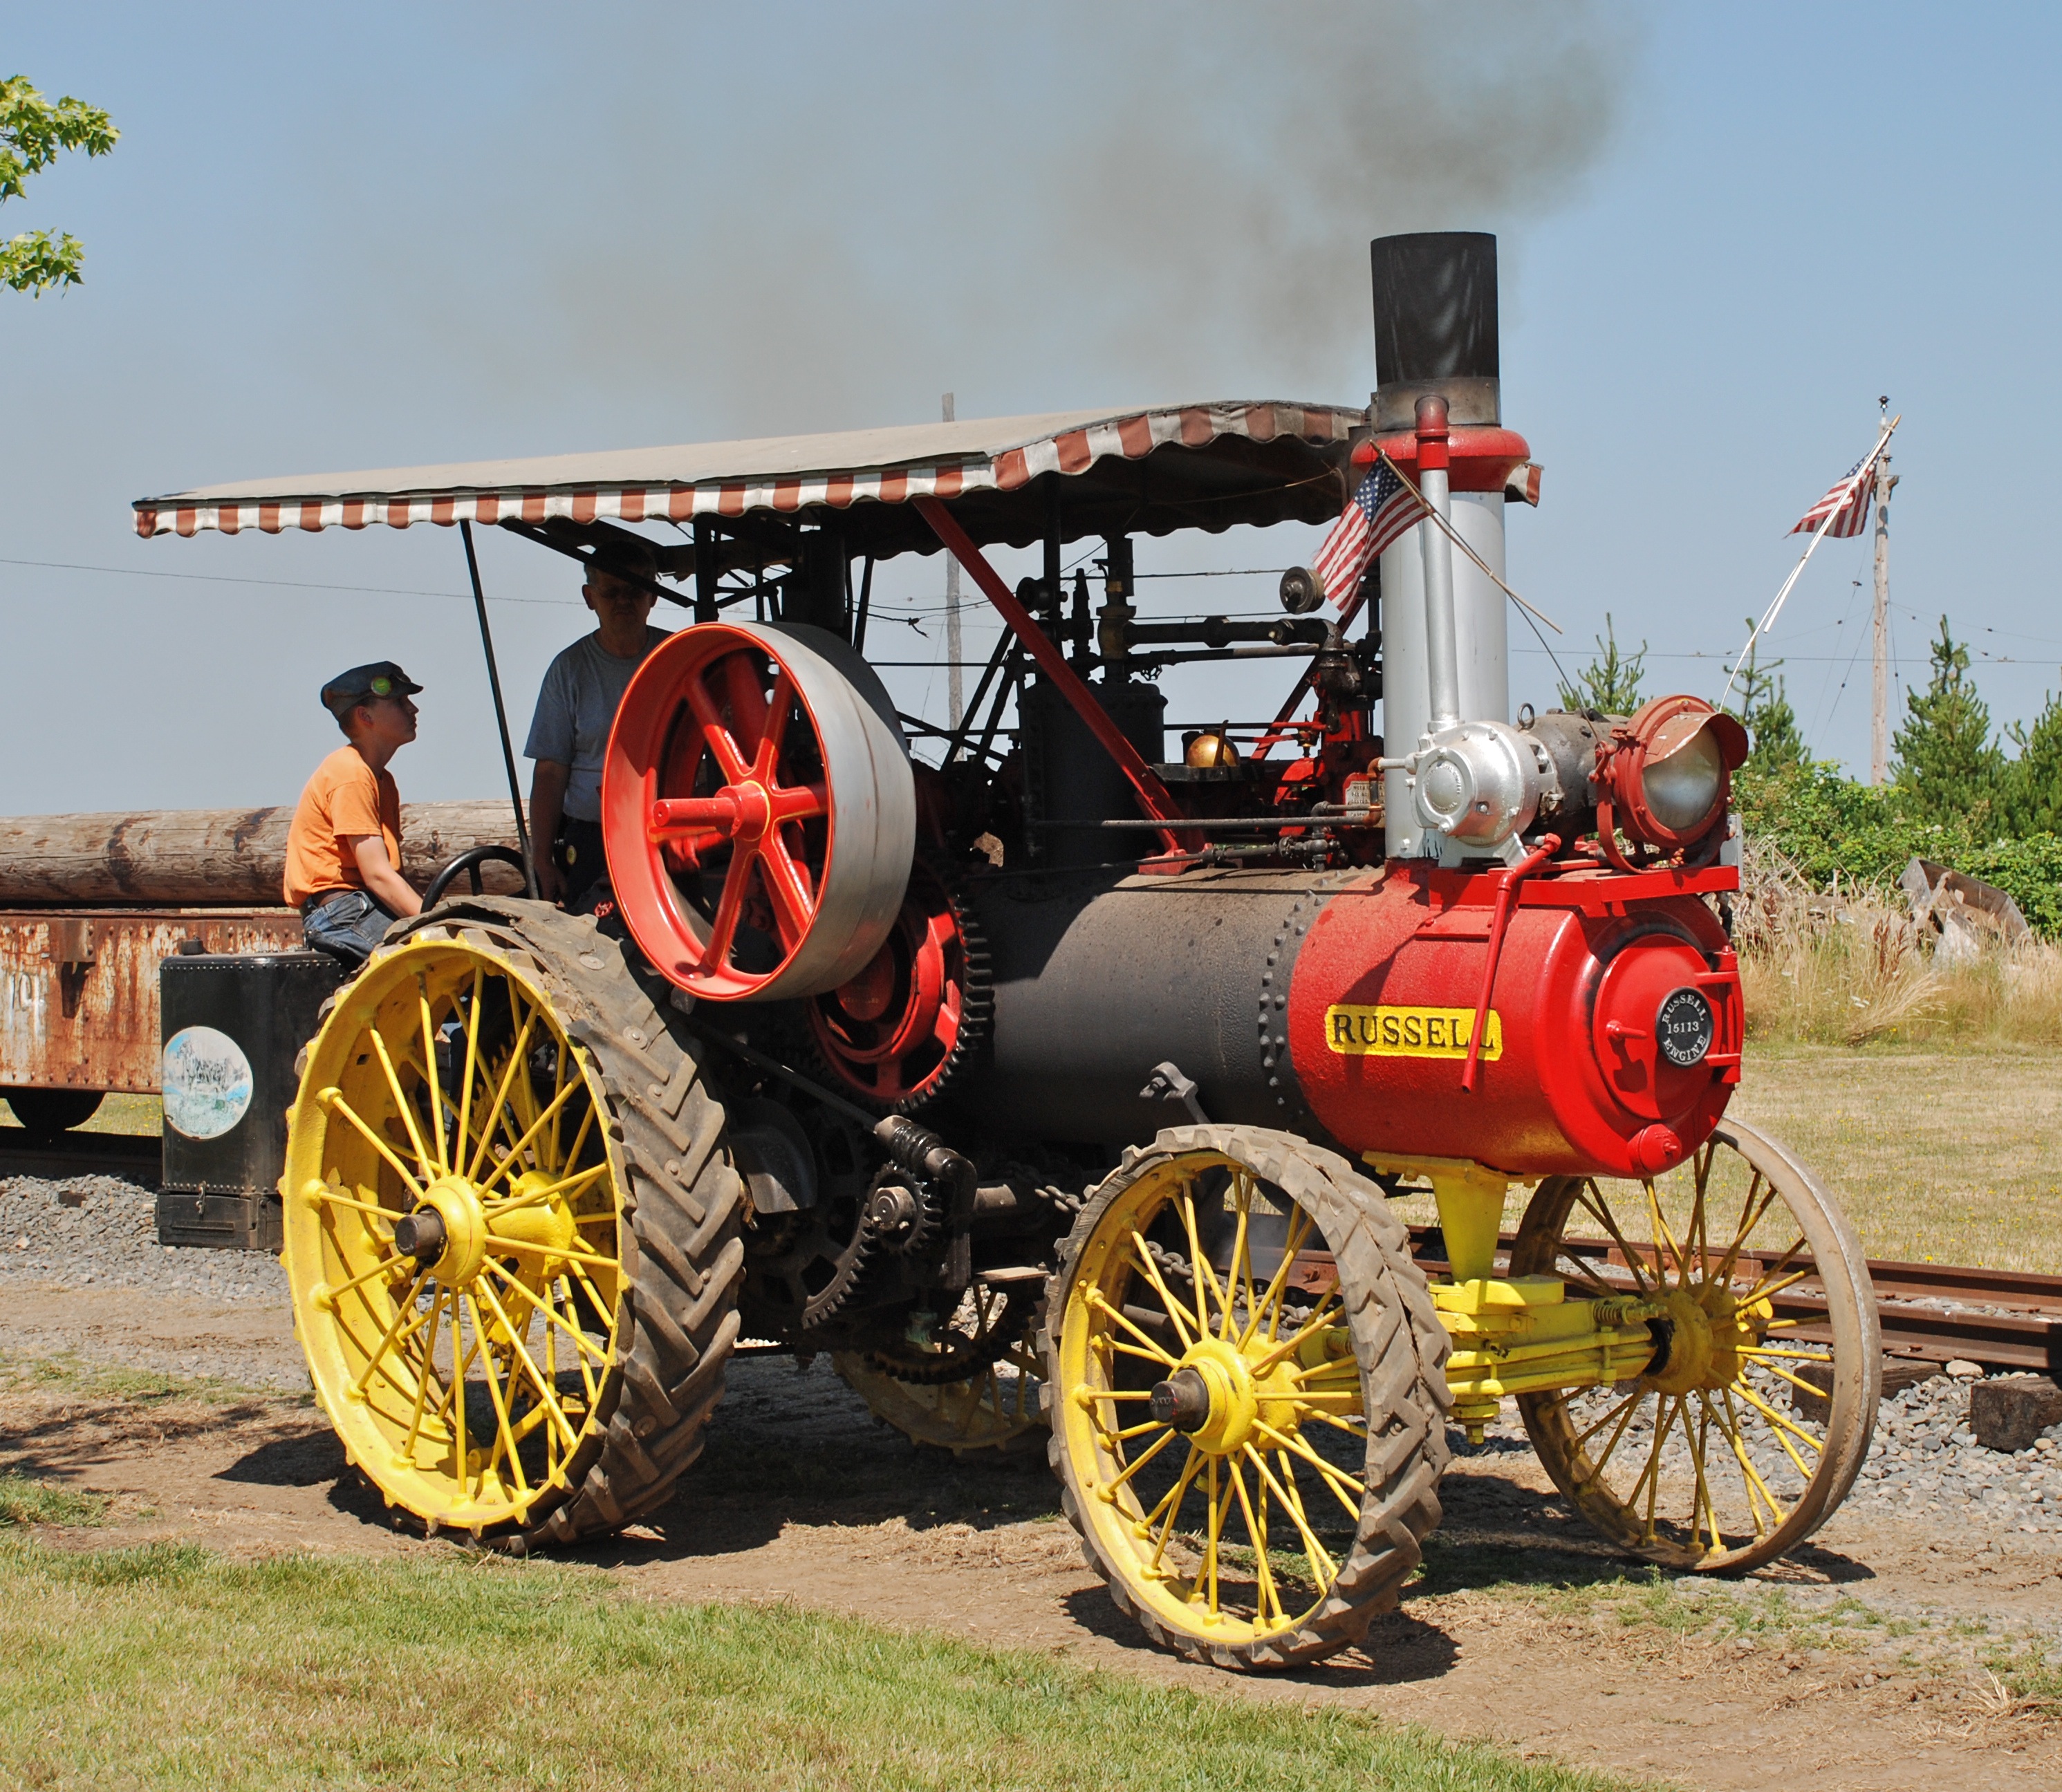 Vehicles which are powered by steam фото 31